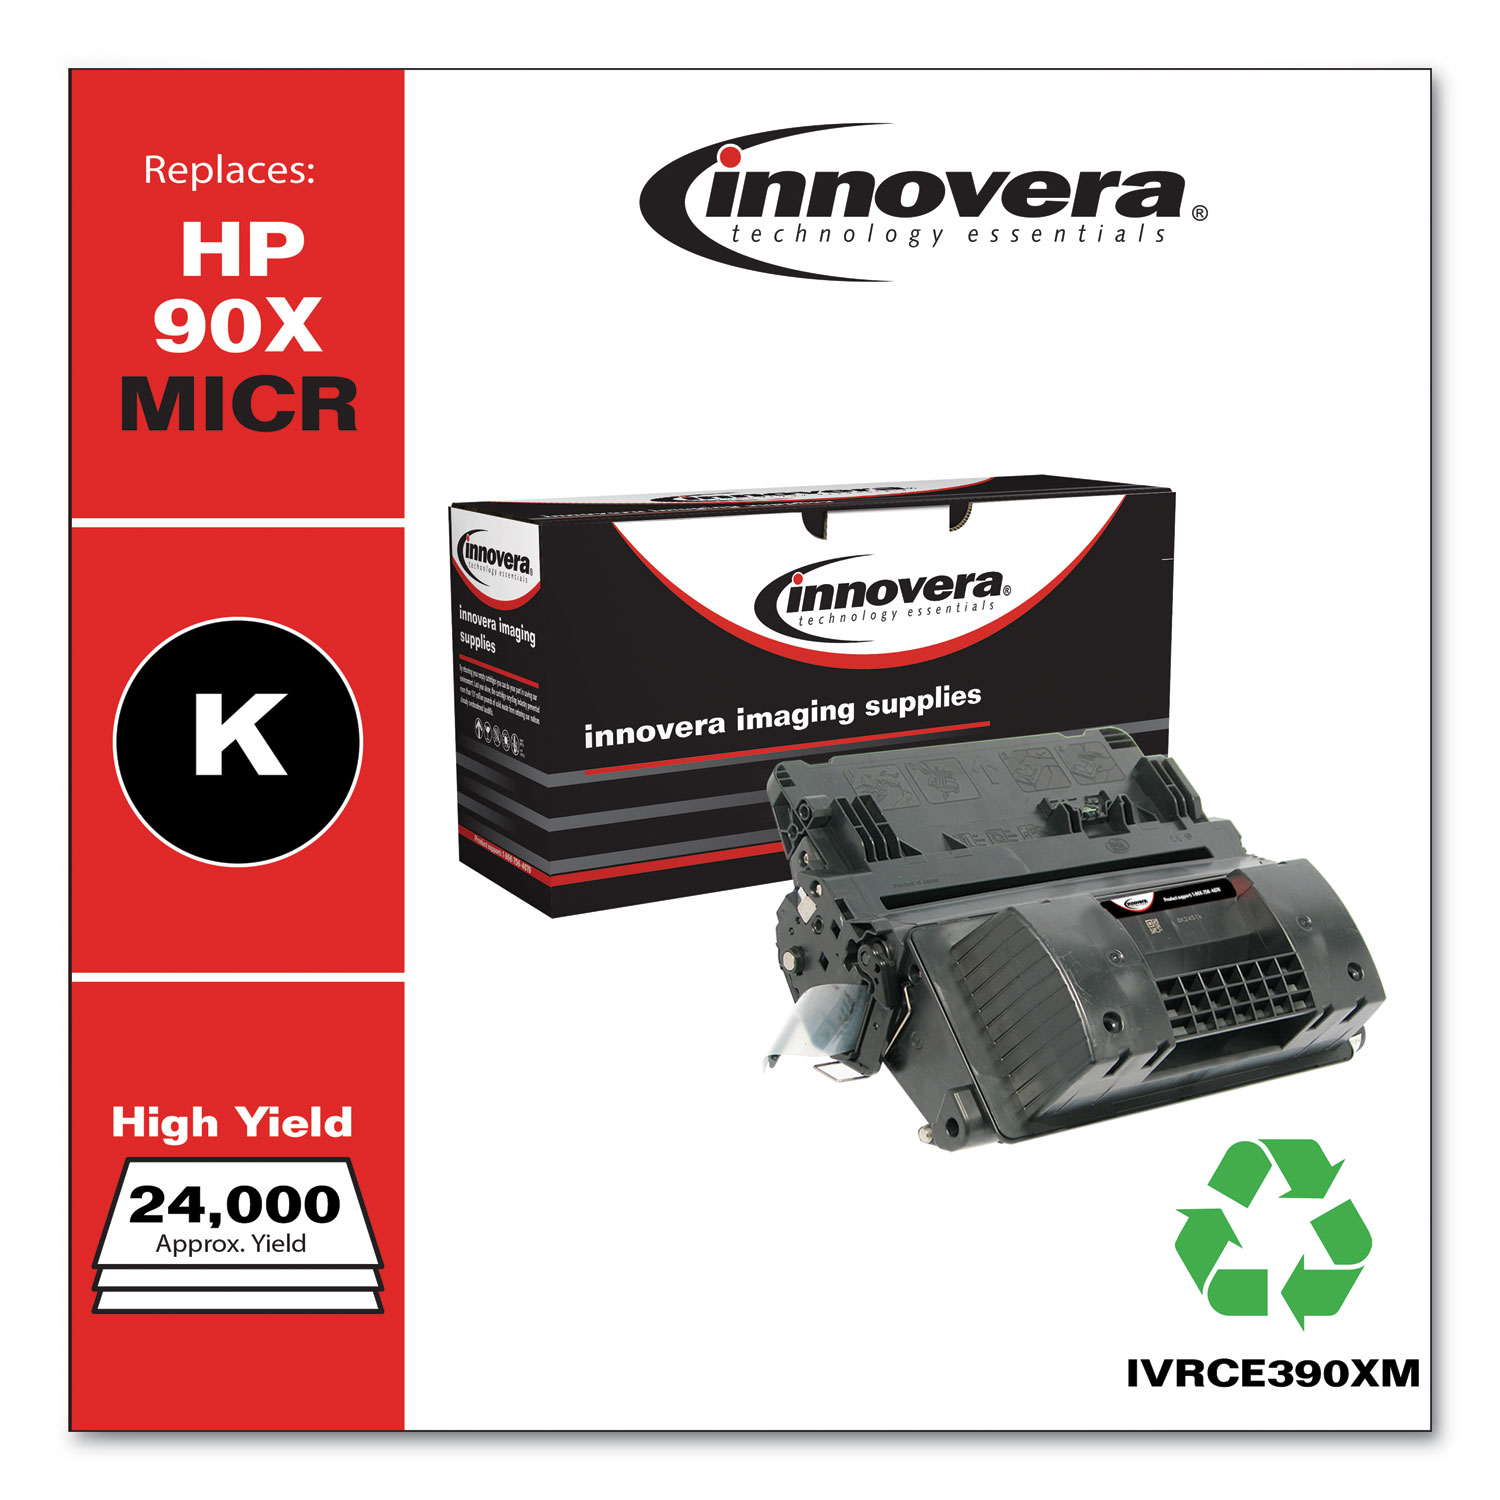  Innovera IVRCE390XM Remanufactured Black High-Yield MICR Toner, Replacement for HP 90XM (CE390XM), 24,000 Page-Yield (IVRCE390XM) 